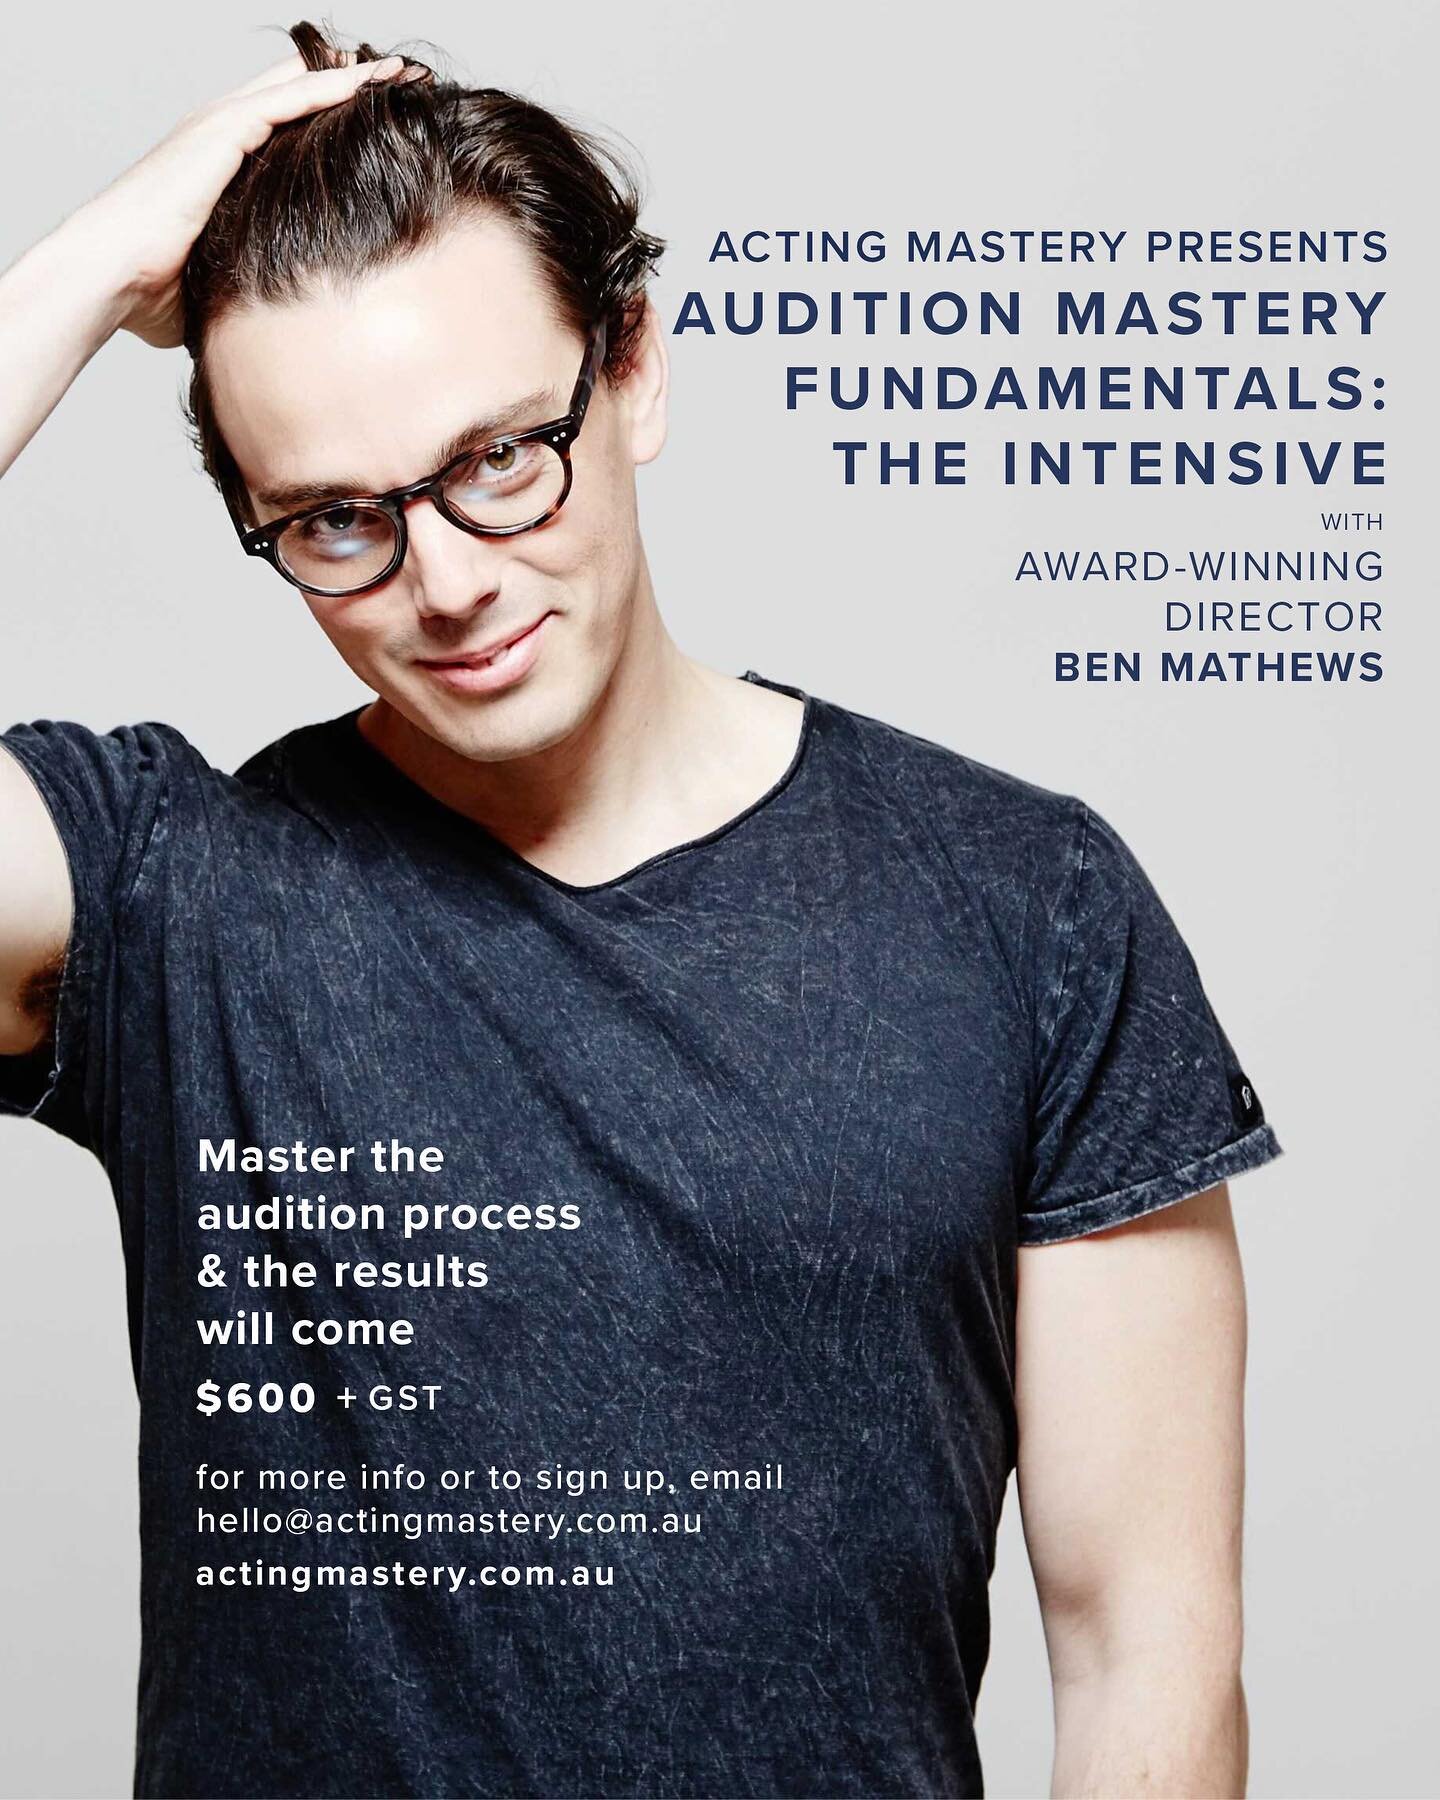 New dates announced for our next Fundamentals Intensive in September - ONLY 3 SPOTS LEFT!
DATE: Fri 16 Sep, 10am-6pm - Sat 17 Sep, 10am-7pm
COST: $600 +GST
LOCATION: Randwick Studio
You do not want to miss out on this, so email hello@actingmastery.co